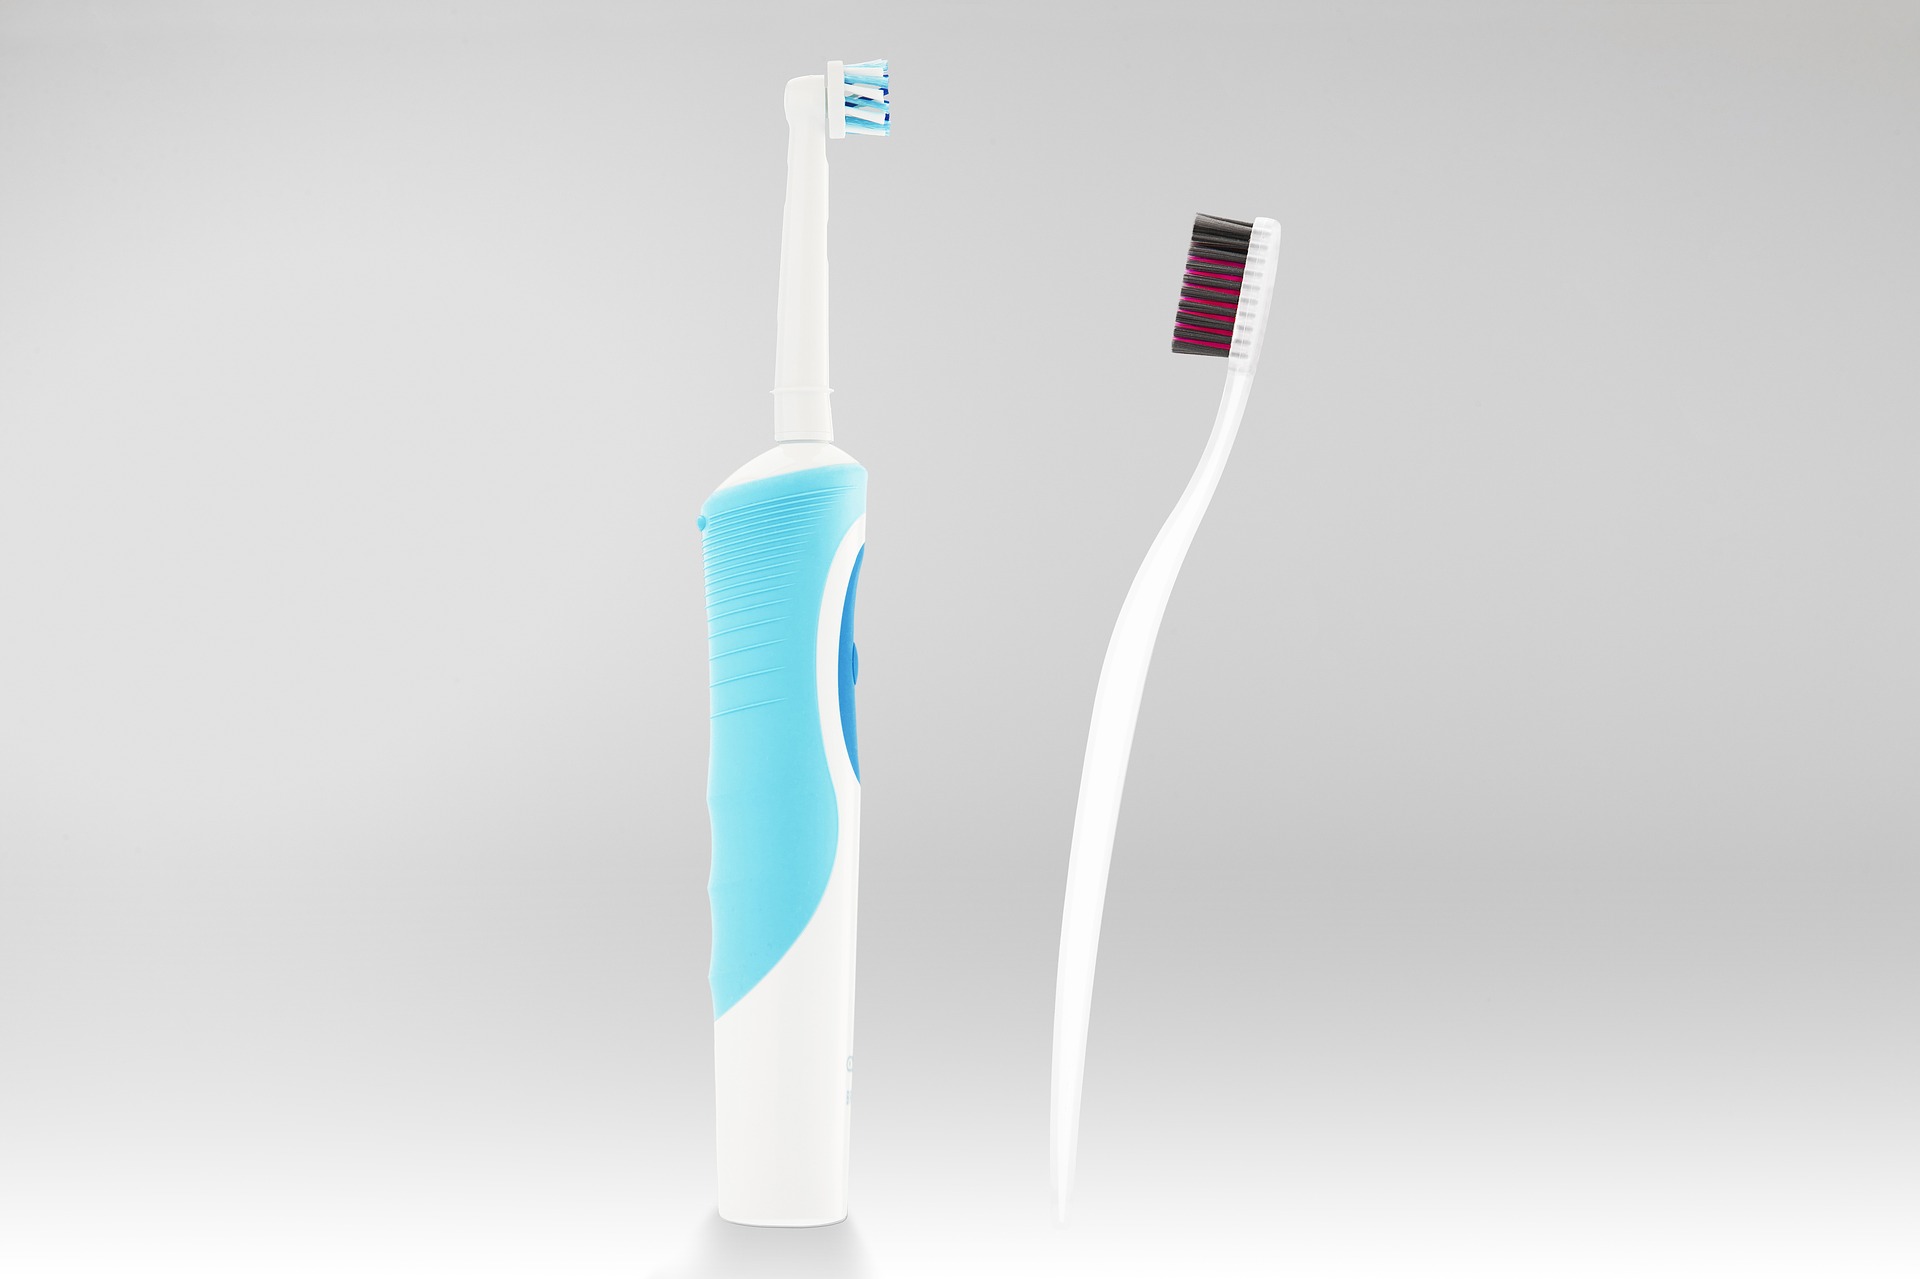 Should You Recommend Smart Toothbrushes?